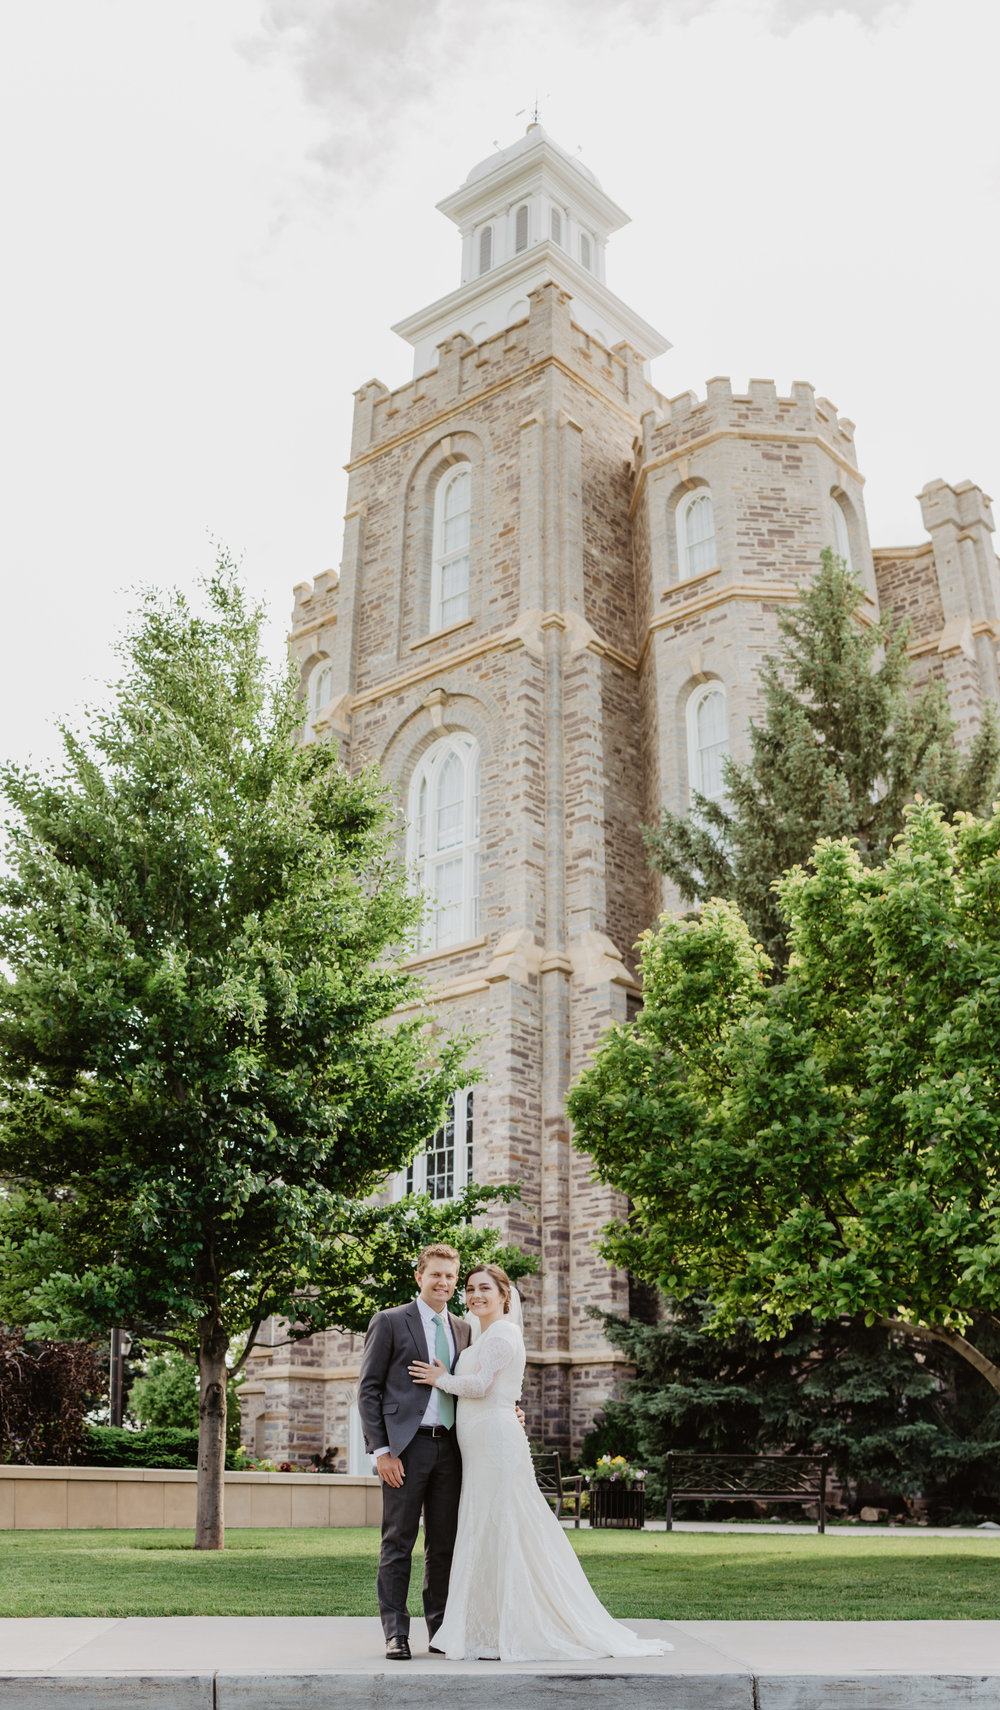 Jocilyn Bennett Photography | Utah Bride | LDS Bride | Utah Wedding Photography | When Two Become One | LDS civil wedding ceremony | Blending religions in families | Capturing Raw and Genuine Emotion | Combining Traditions | LDS Logan Temple | Temple Sealing | Bride and Groom in front of the temple |